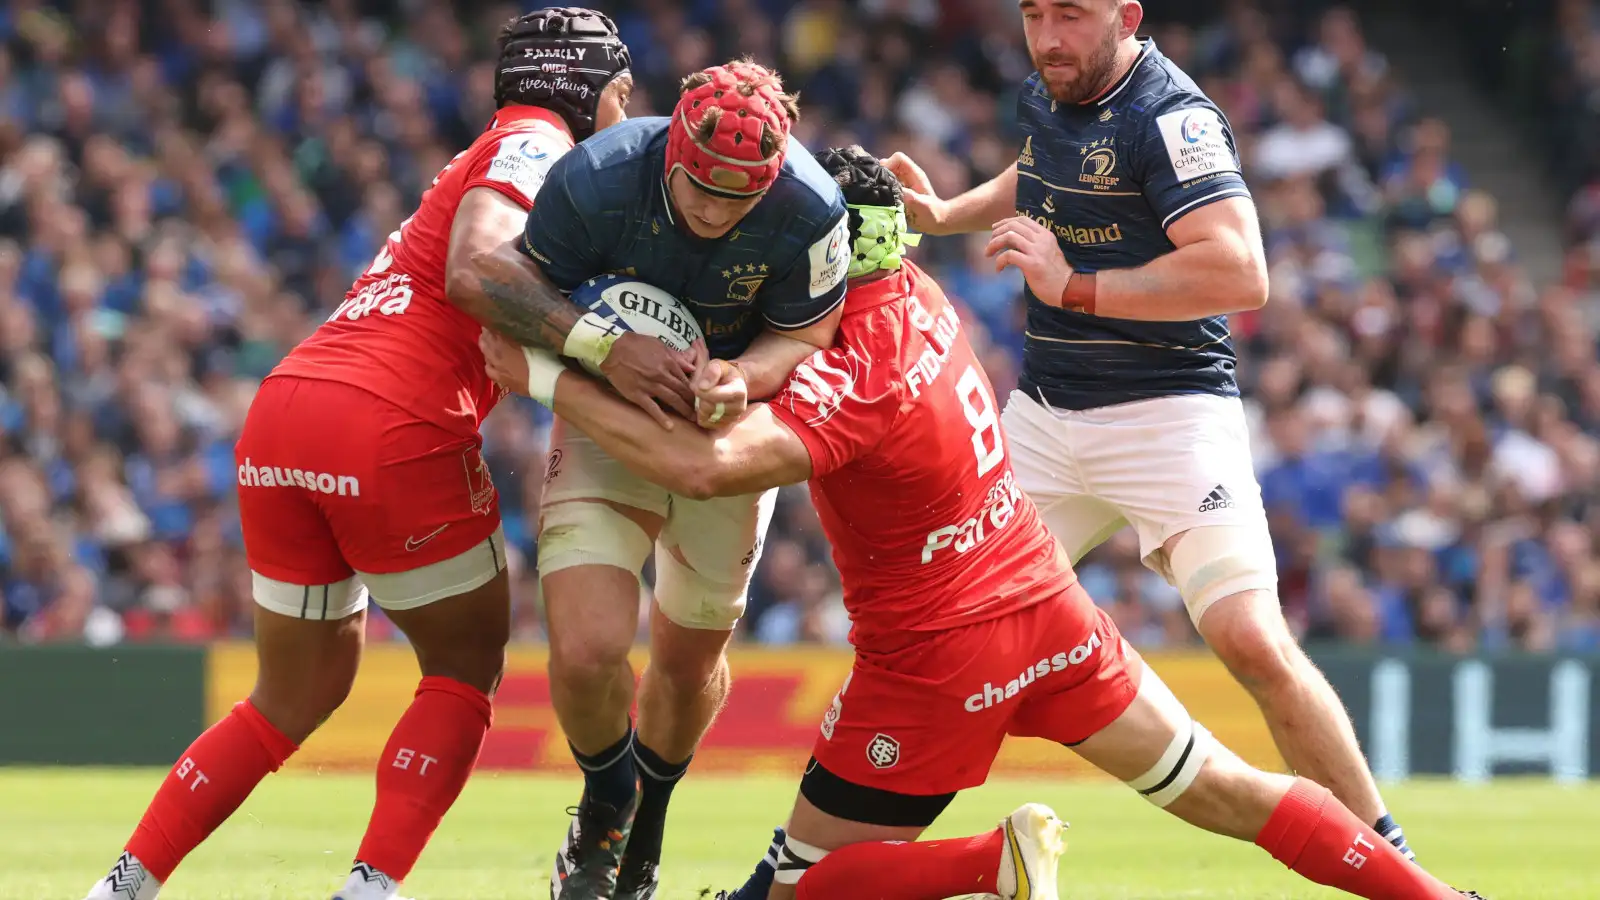 Champions Cup takeaways from leinster v toulouse